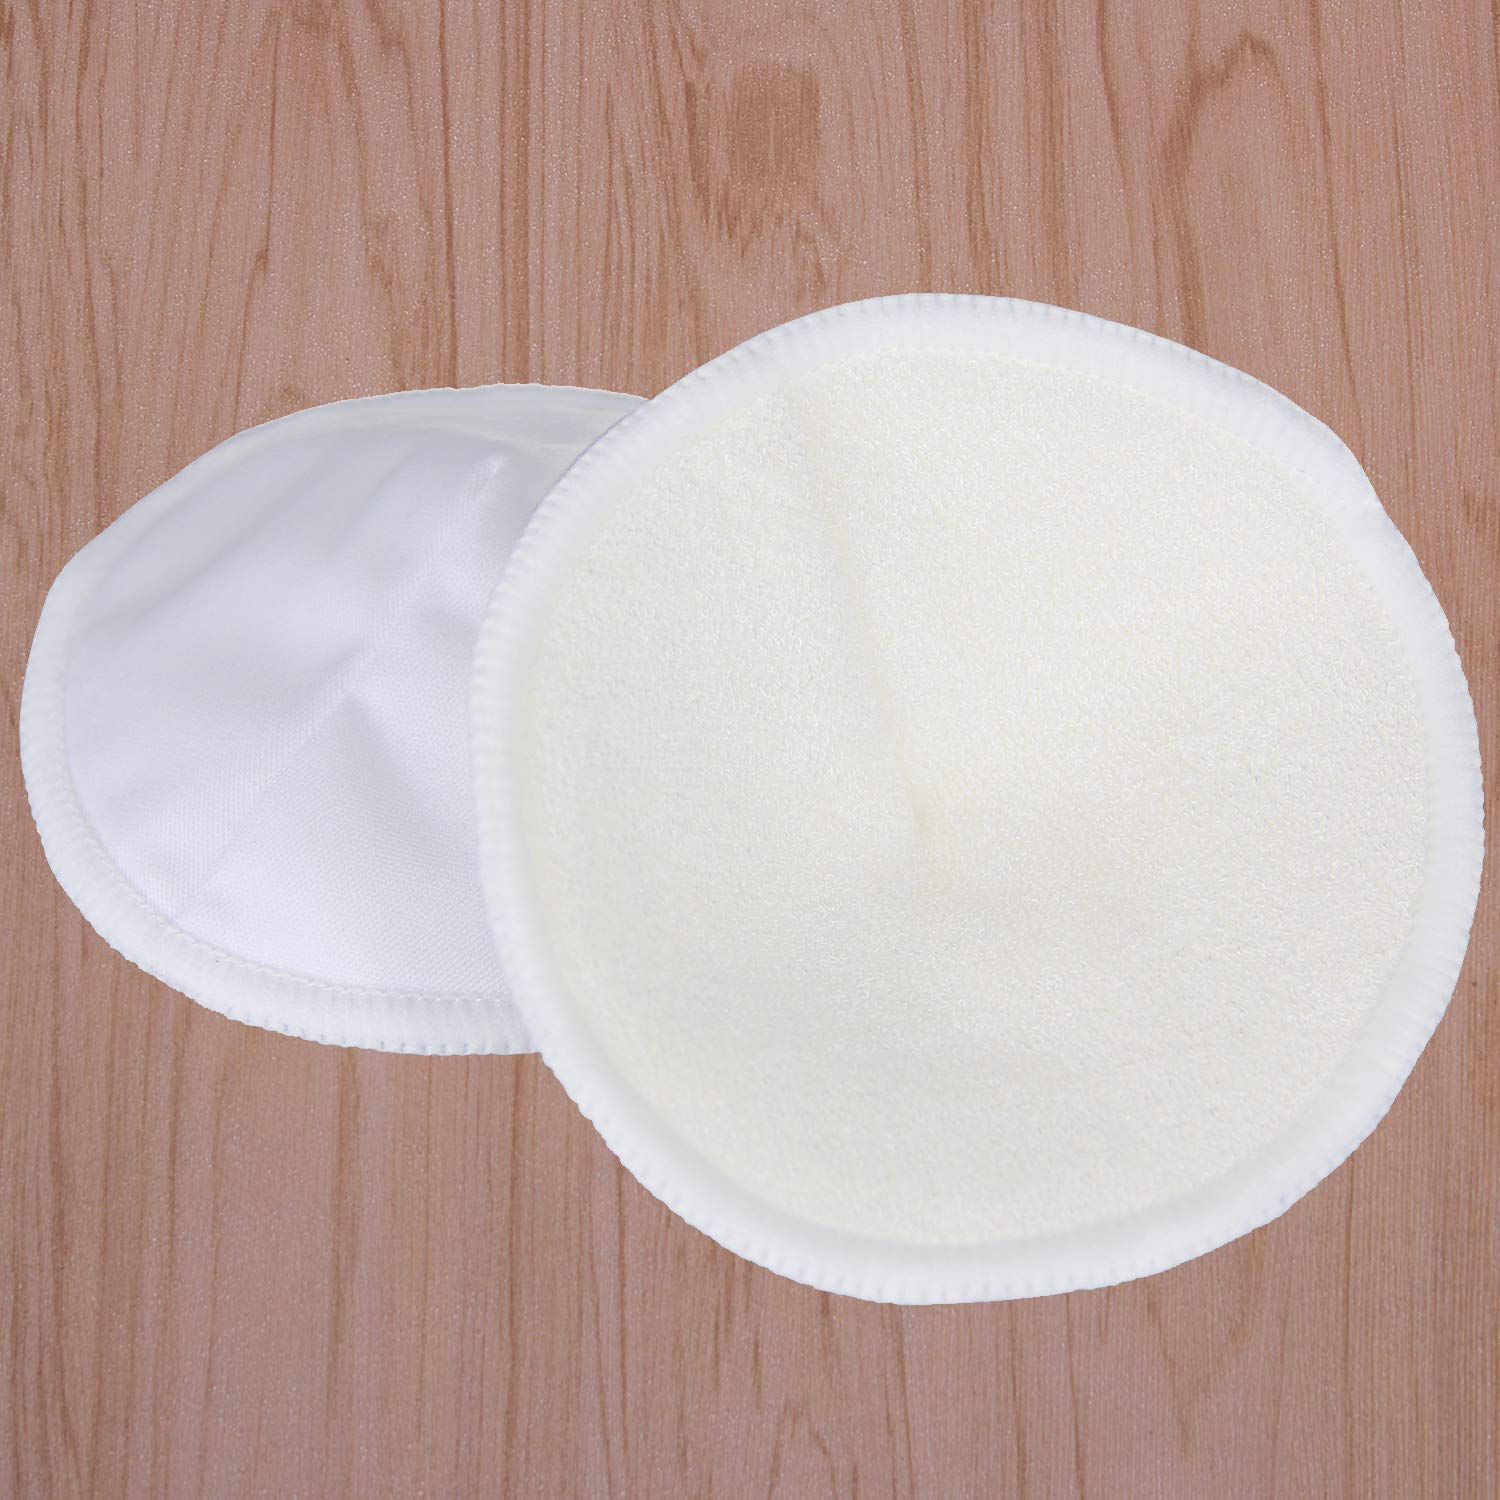 Buy LuvLap Natural Bamboo Washable Nursing Breast Pads With Lace, 10 pcs  Online at Best Price